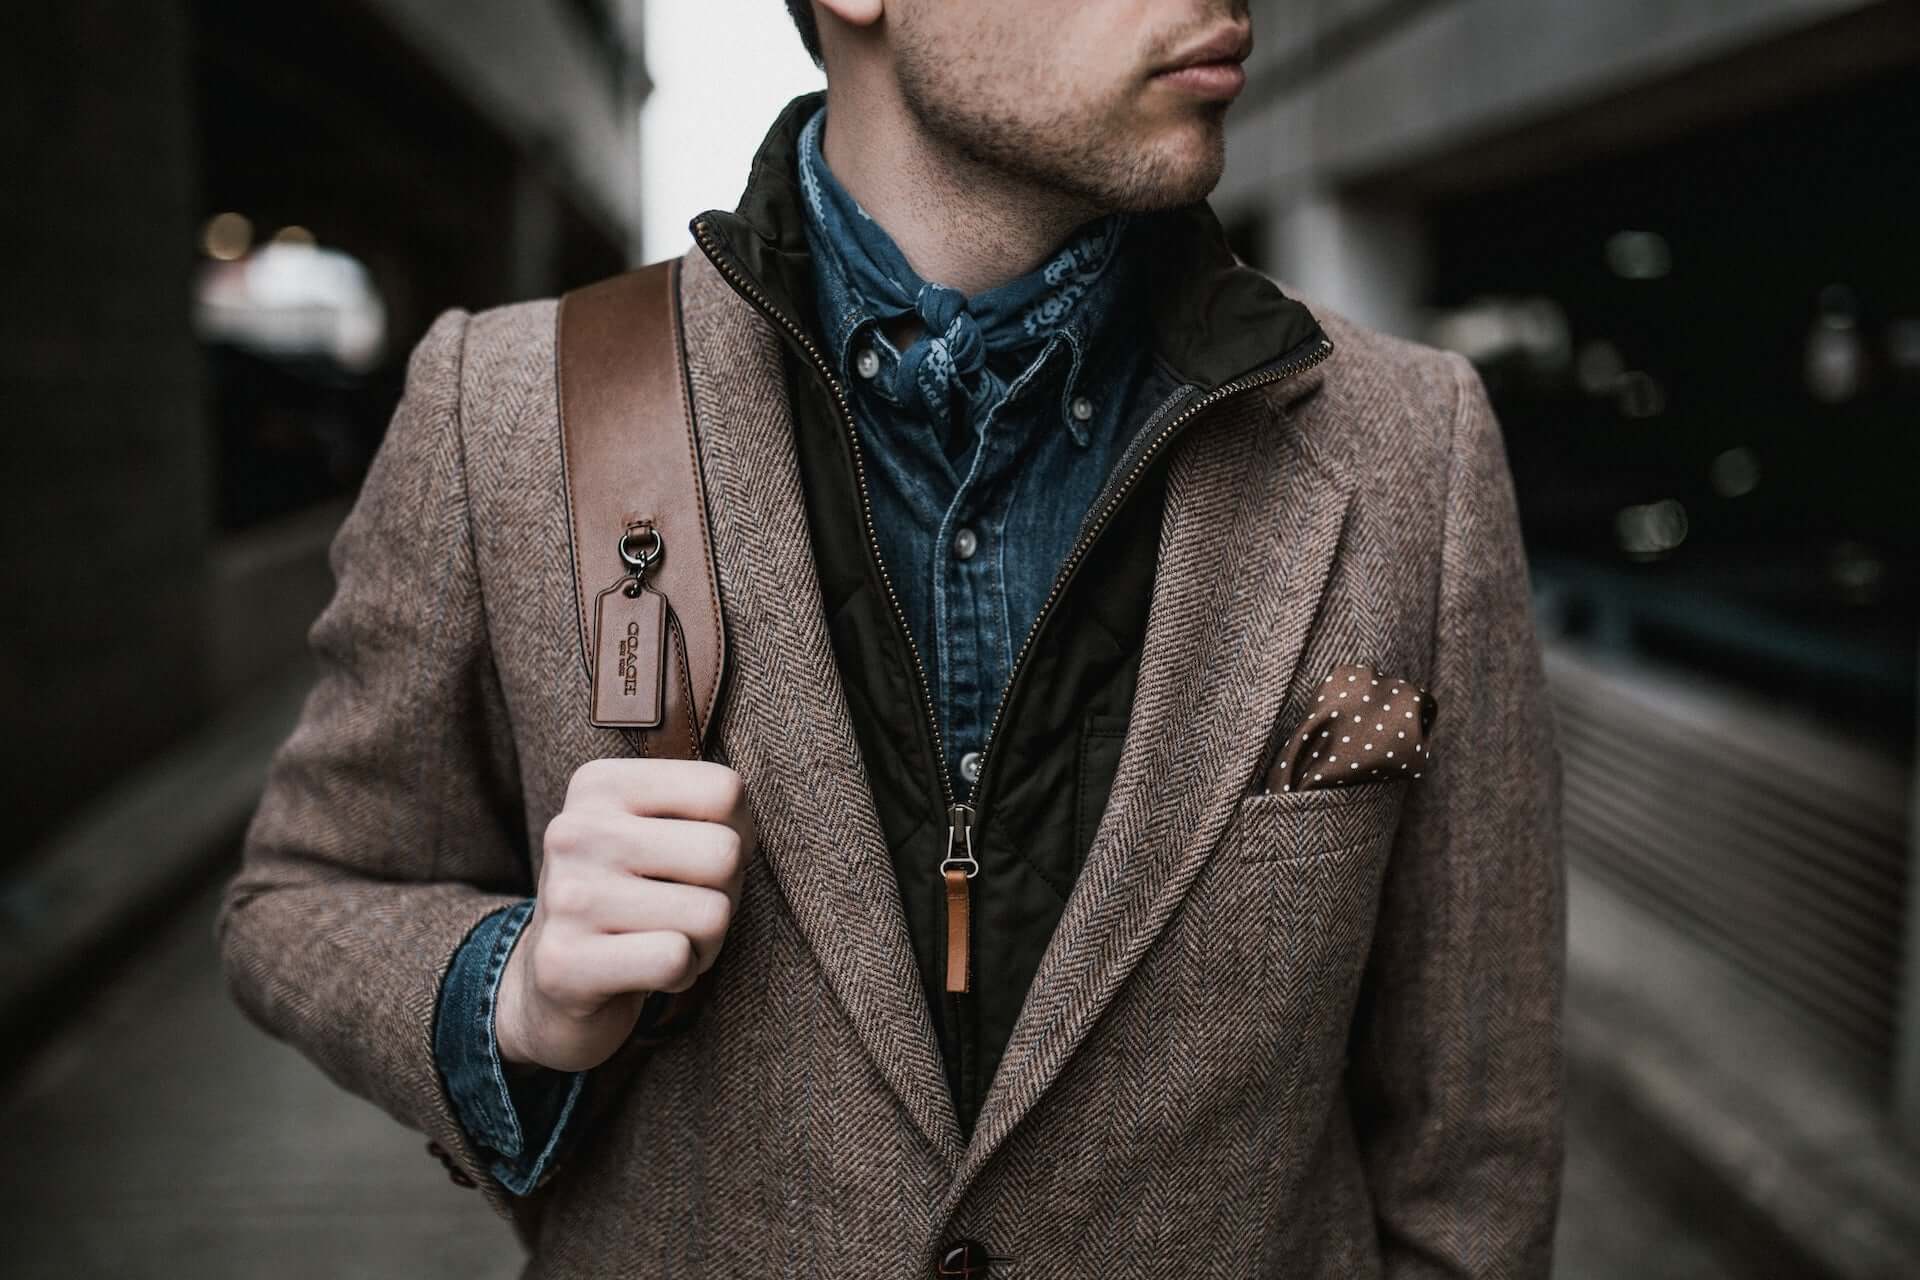 A man in a brown tweed blazer, zip-up grey jacket, and blue button down, carrying a Coach bag.